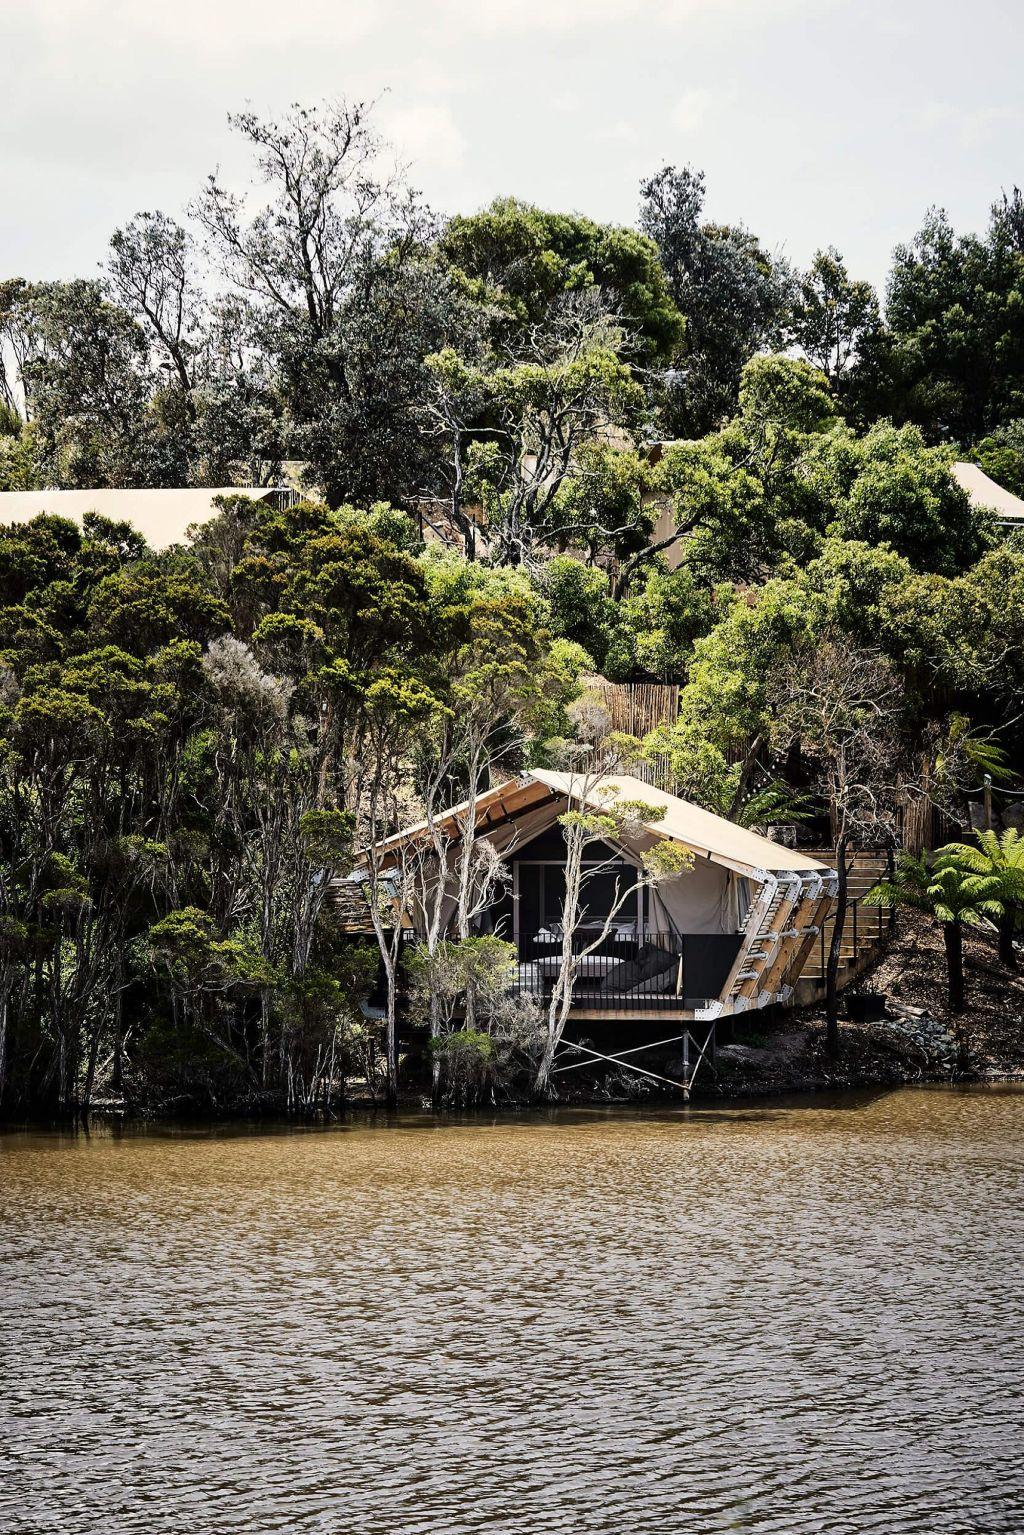 Glamping_happens_right_on_the_waters_edge_as_part_of_the_destination_immersion_experiences._Photo_Sharyn_Cairns_znf2sm